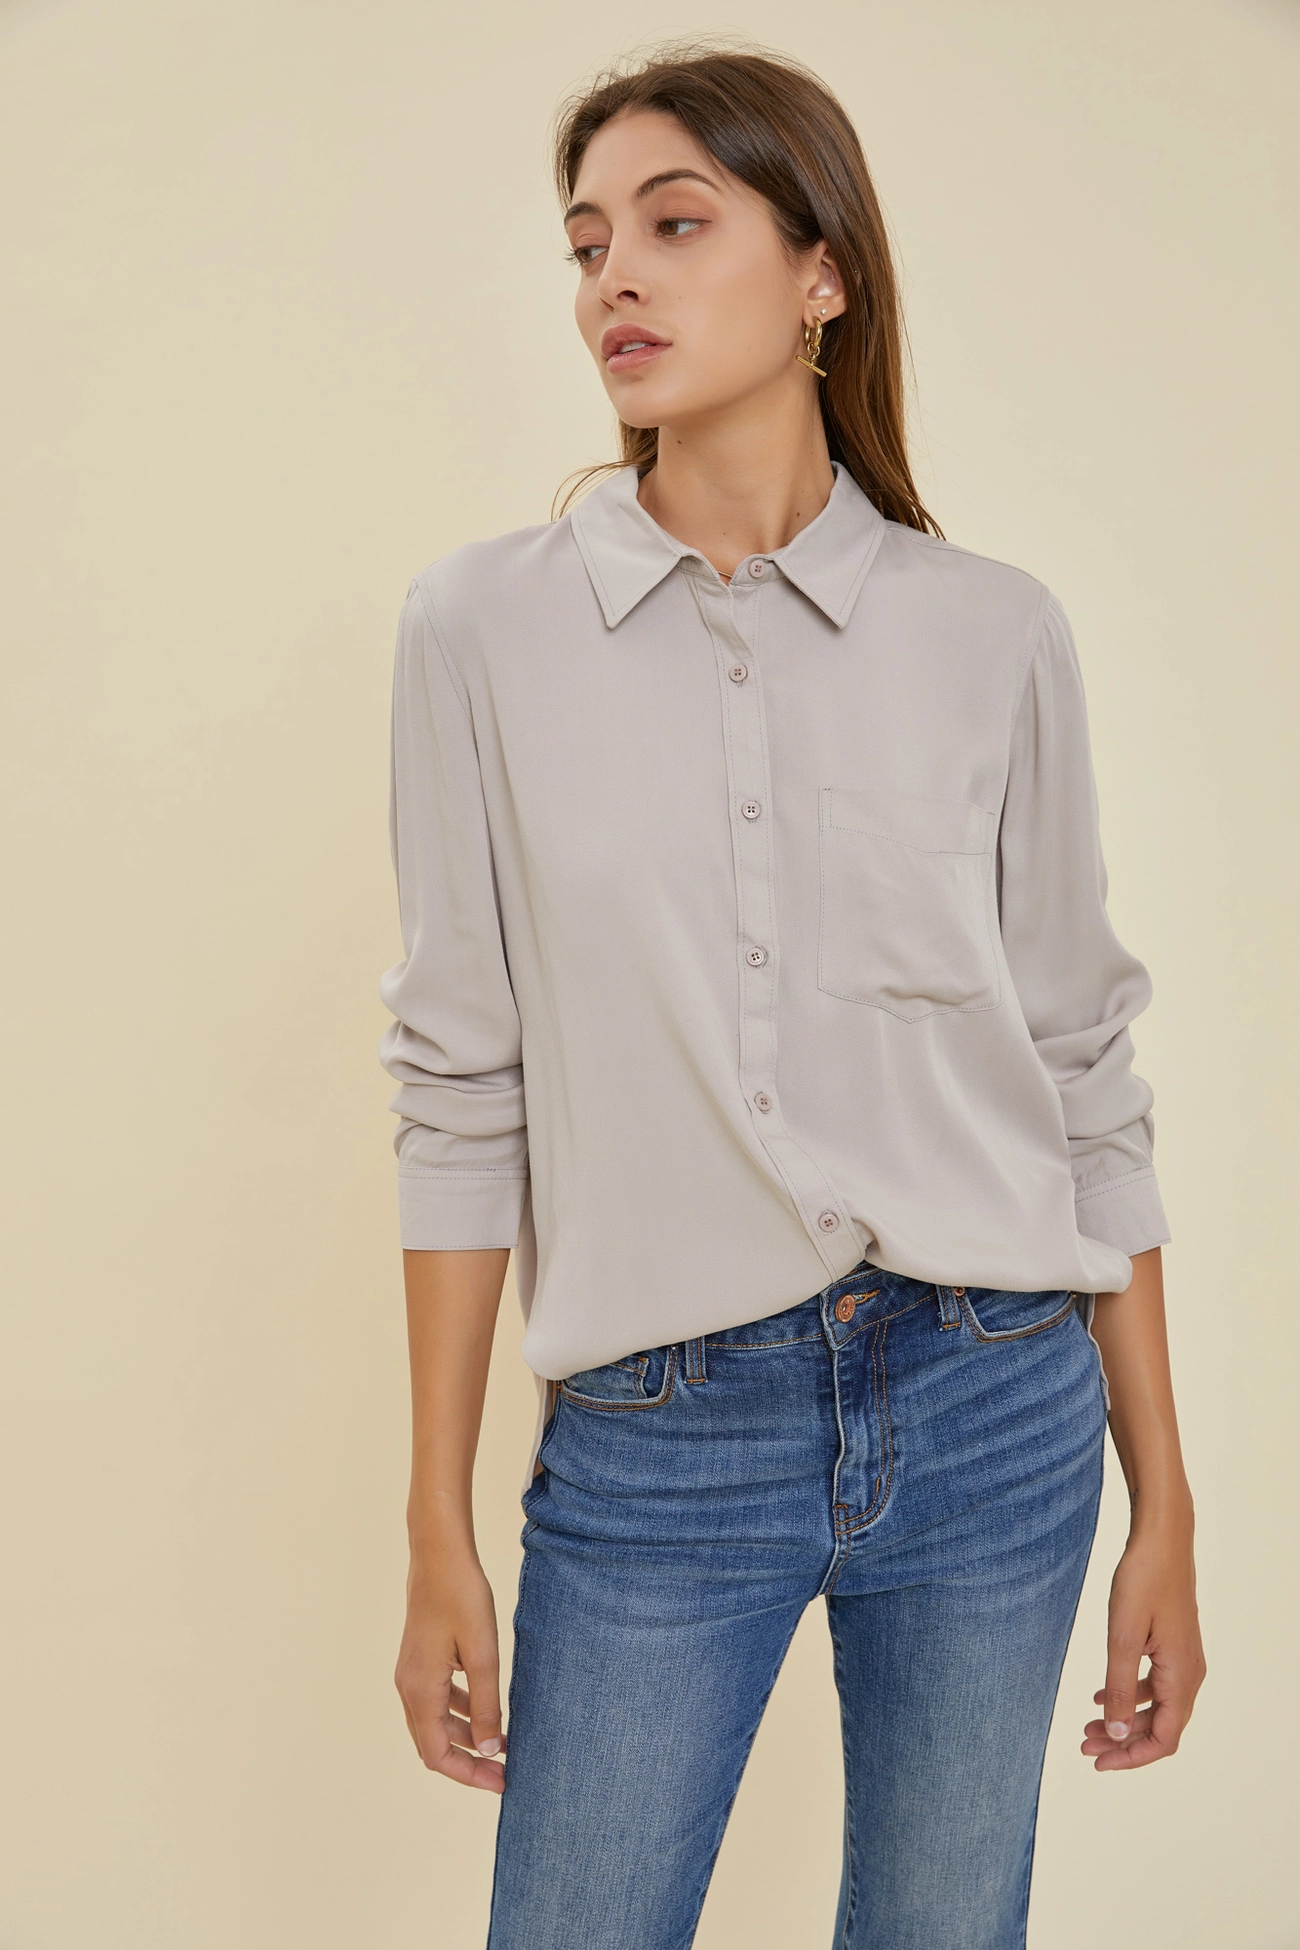 Must Have Blouse